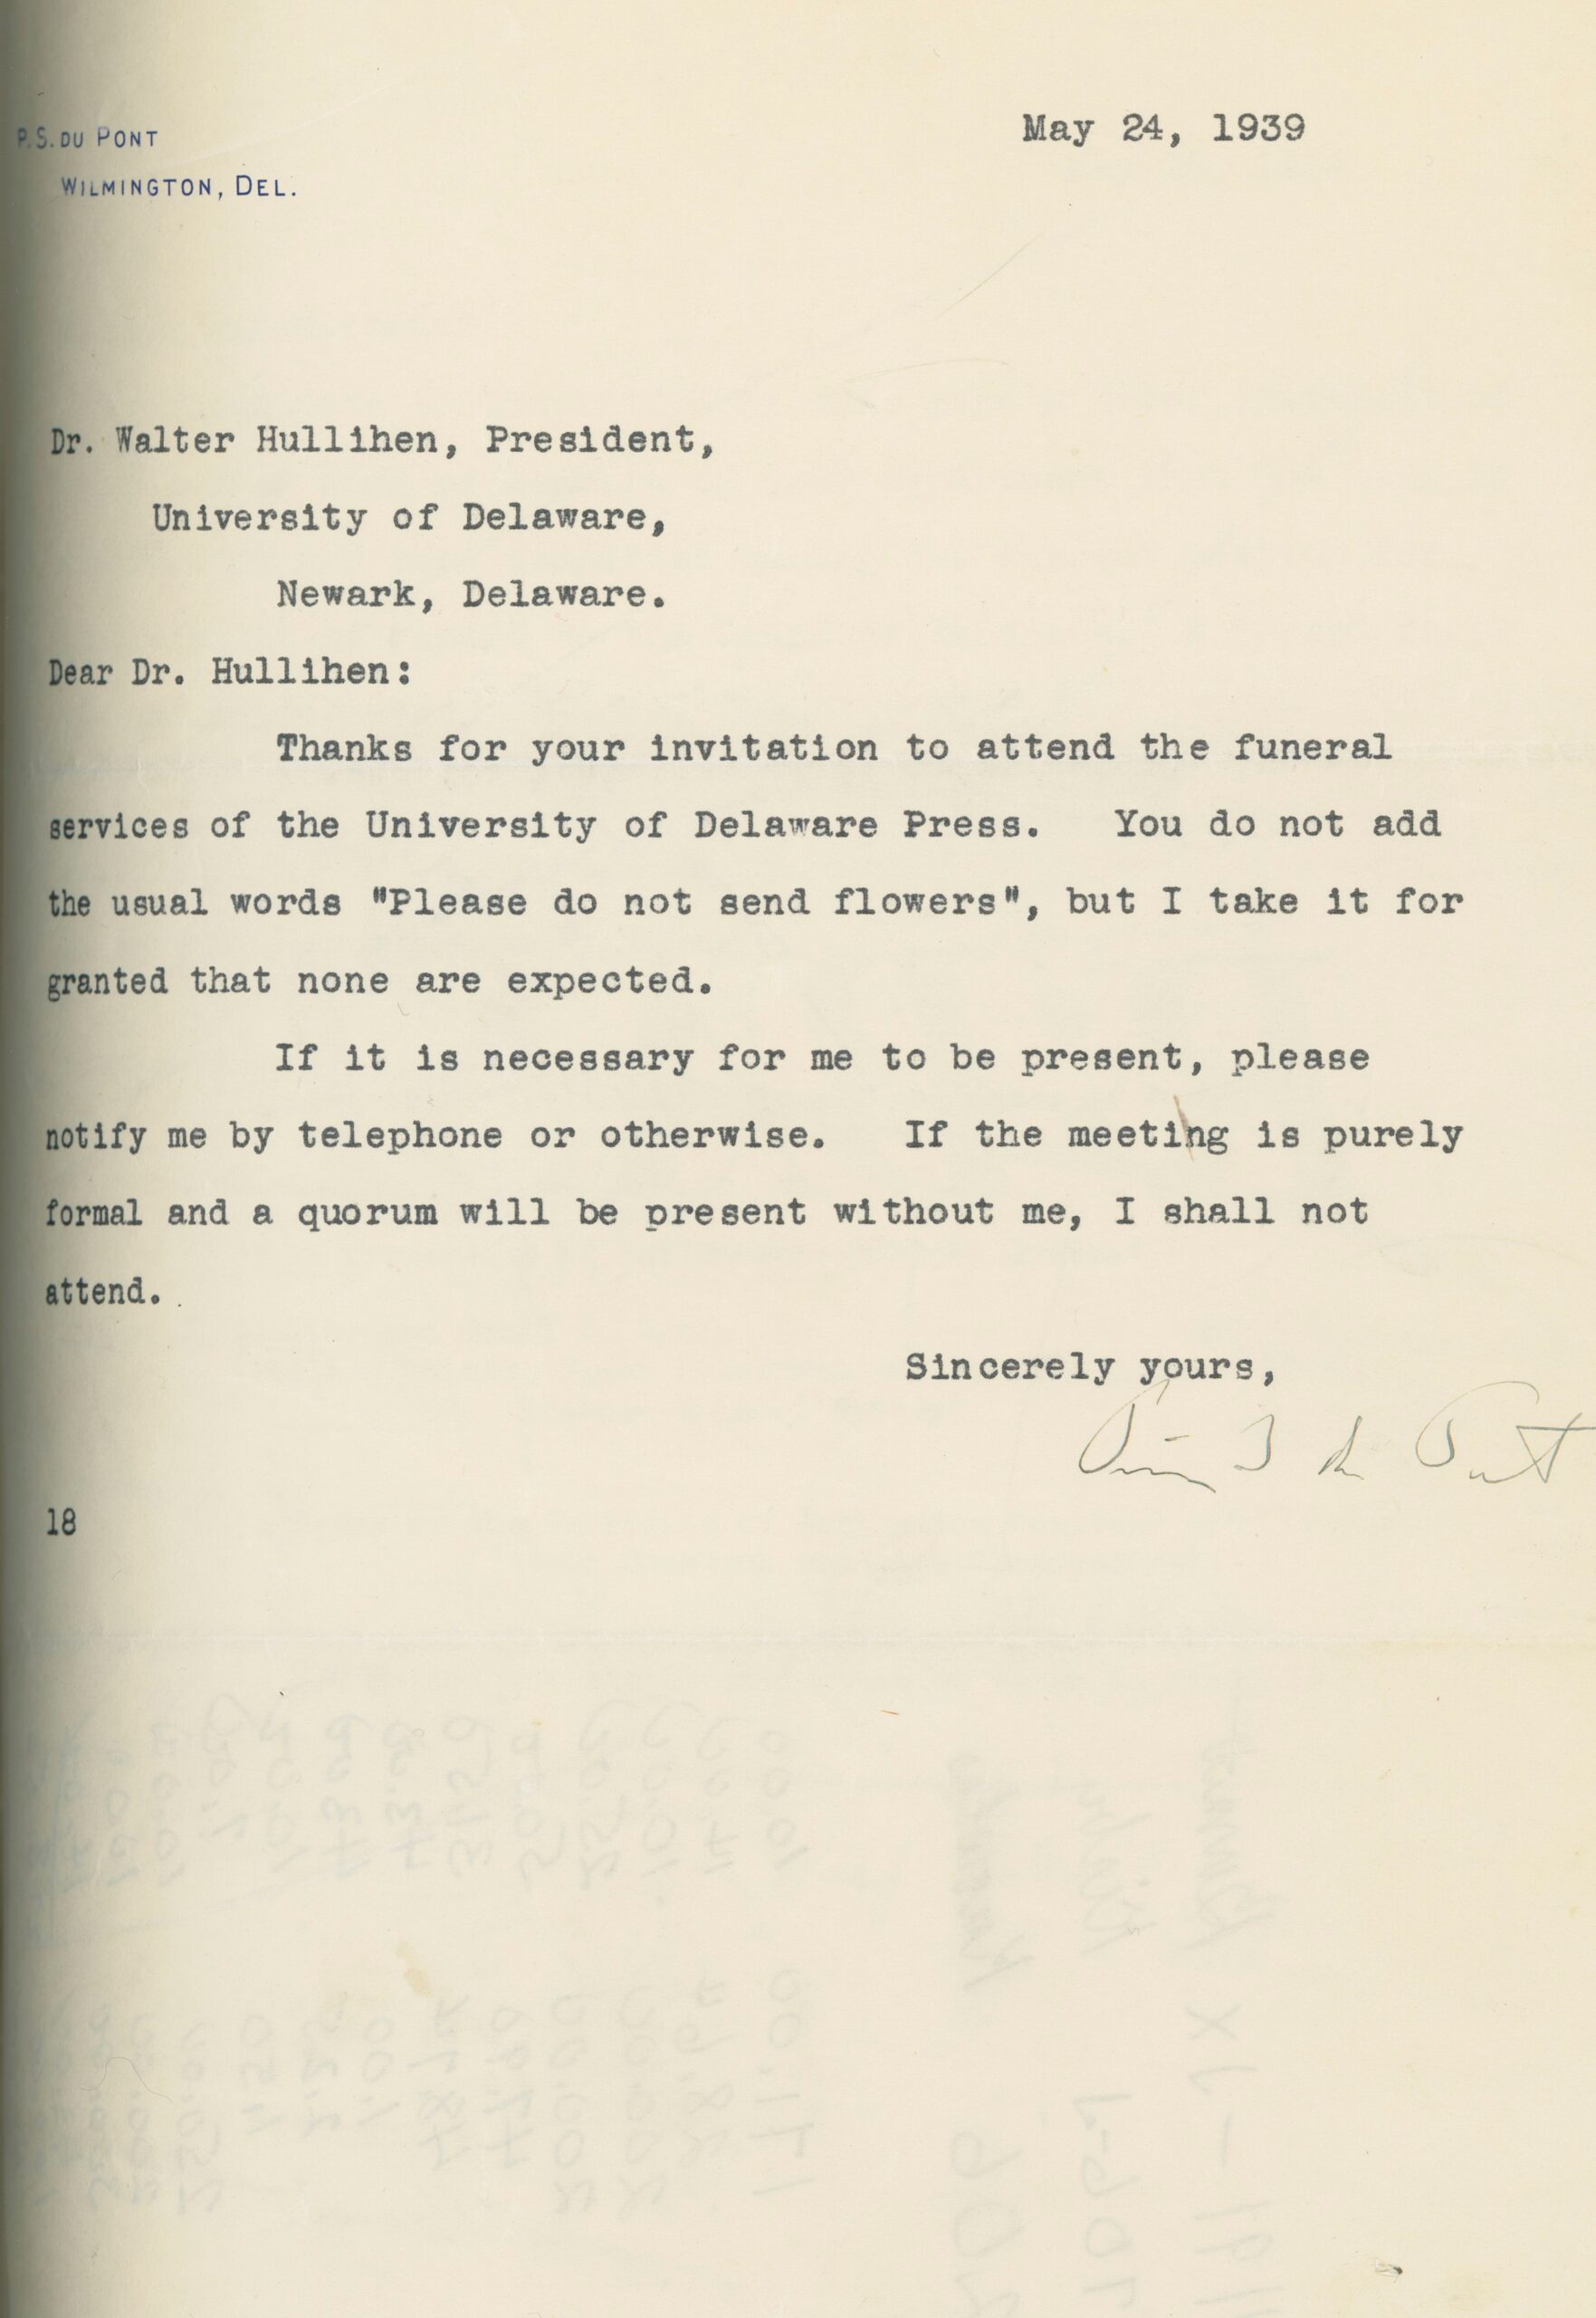 Letter from P. S. du Pont to Walter Hullihen May 24, 1939